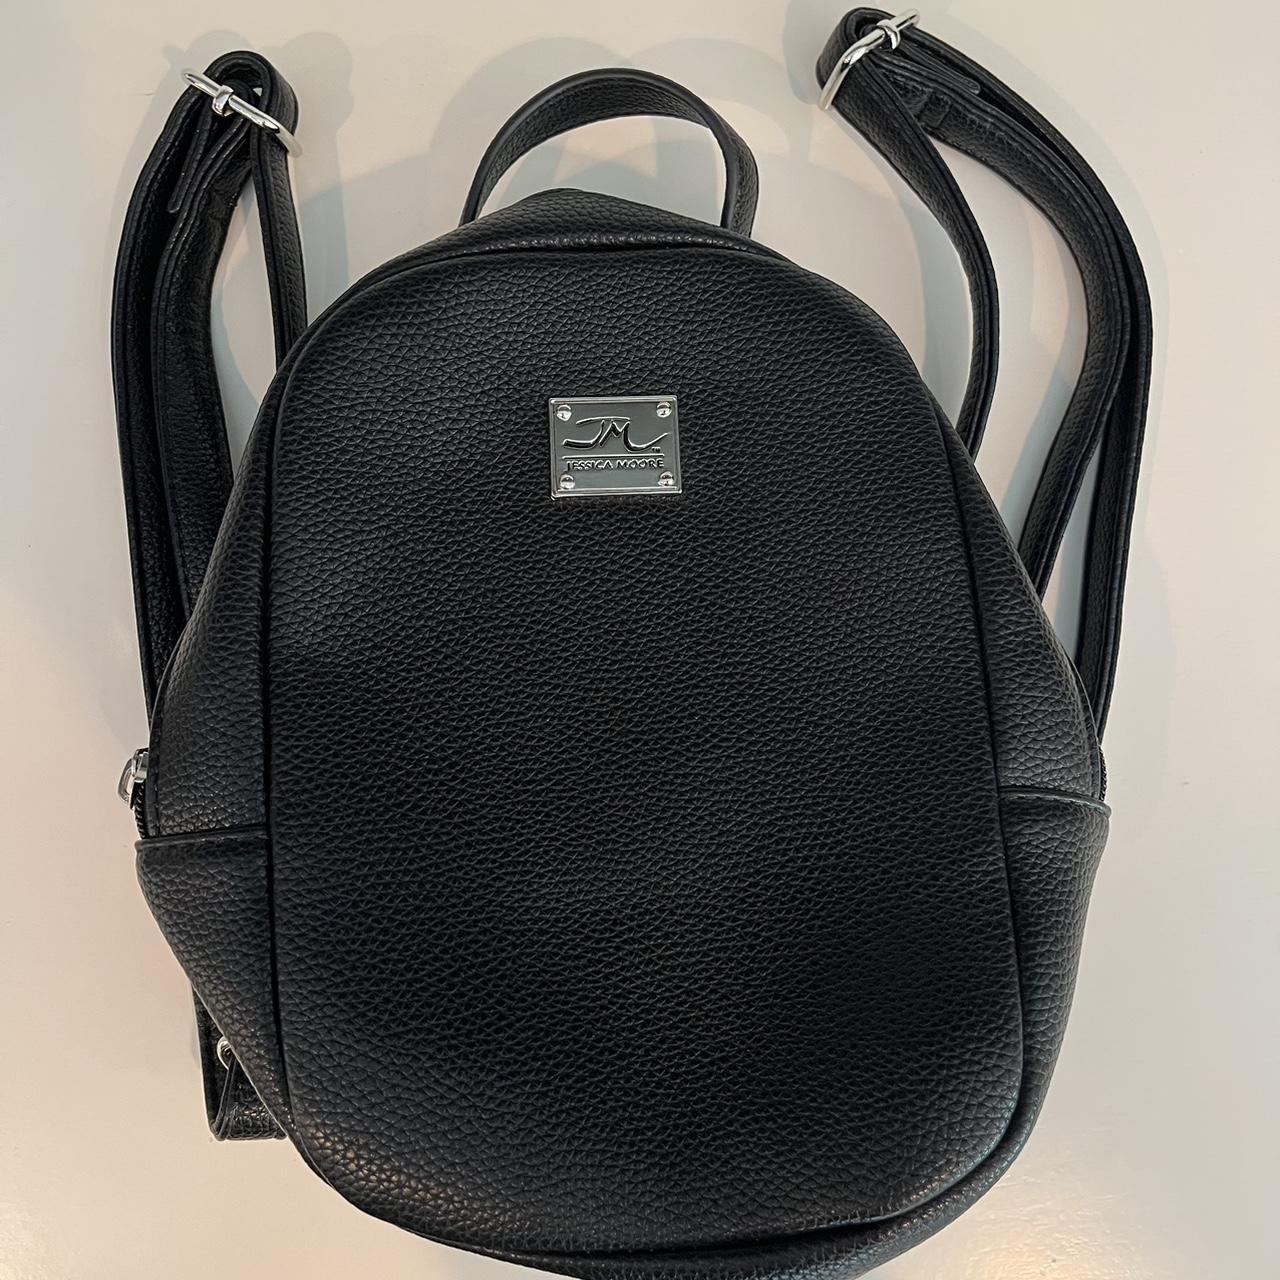 Jessica Moore Backpack purse, Black pebbled faux